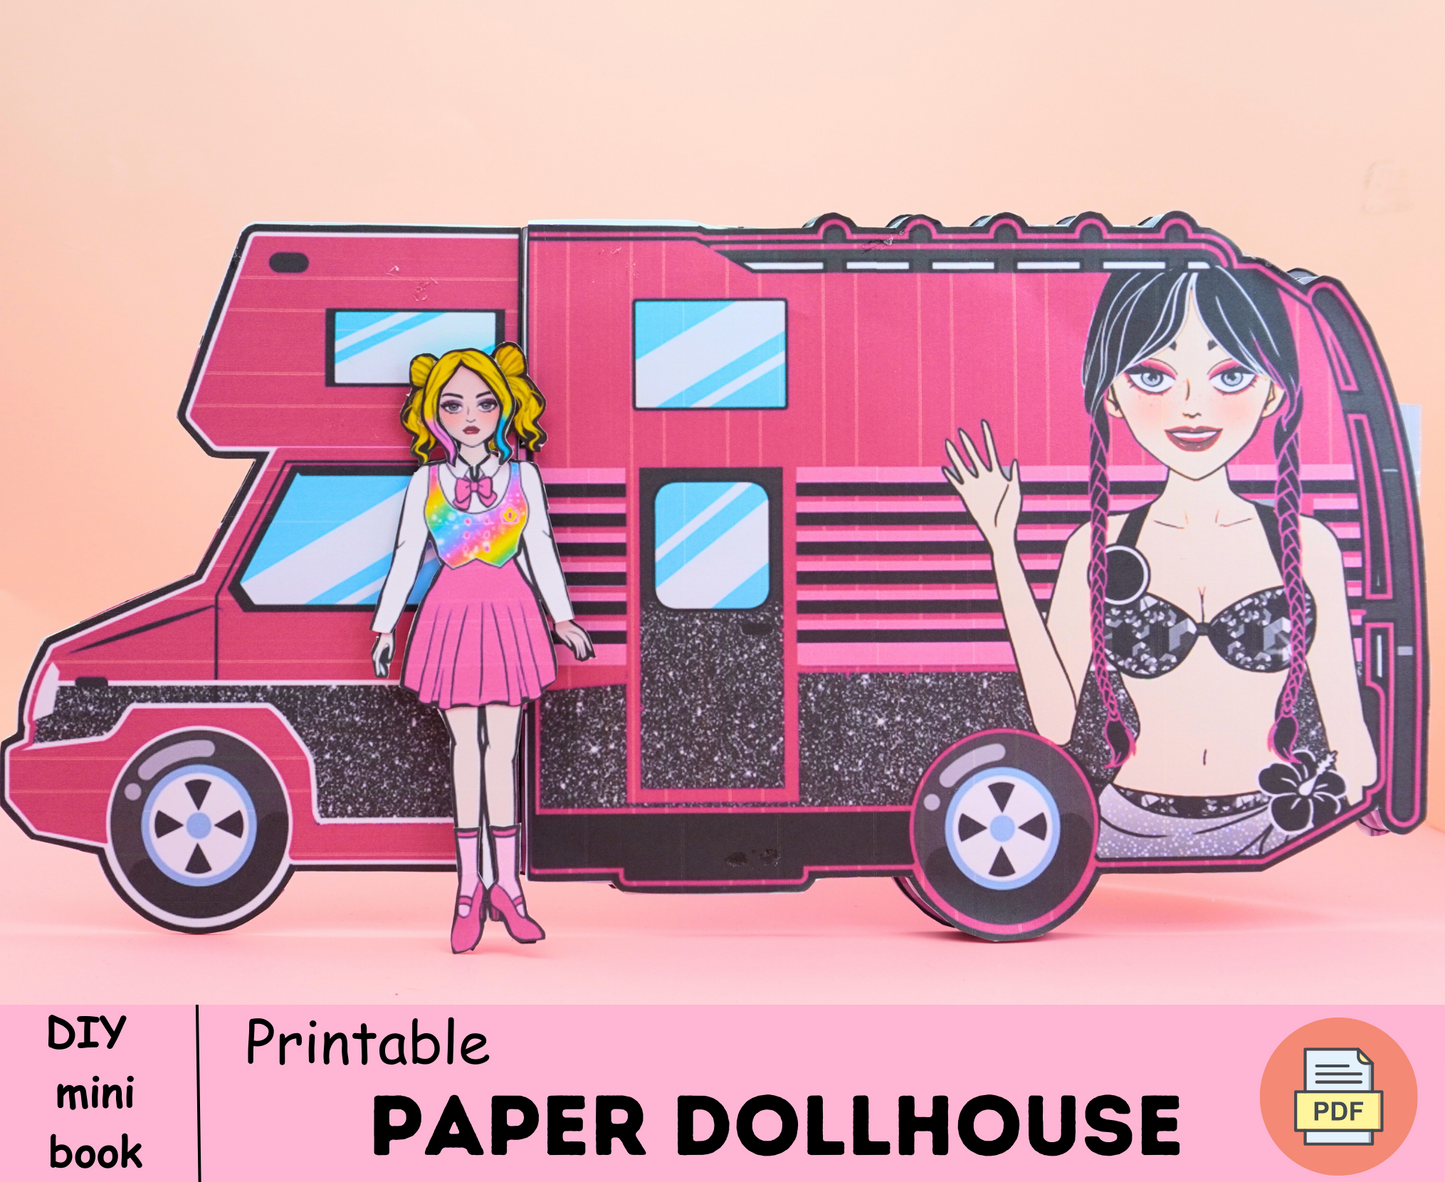 Wednesday Addam Truck Printable Paper Dolls 🌈 Mini Pink DIY Busy Book printable for toddler | Handmade Dollhouse | Montessori busy book🌈 Woa Doll Crafts